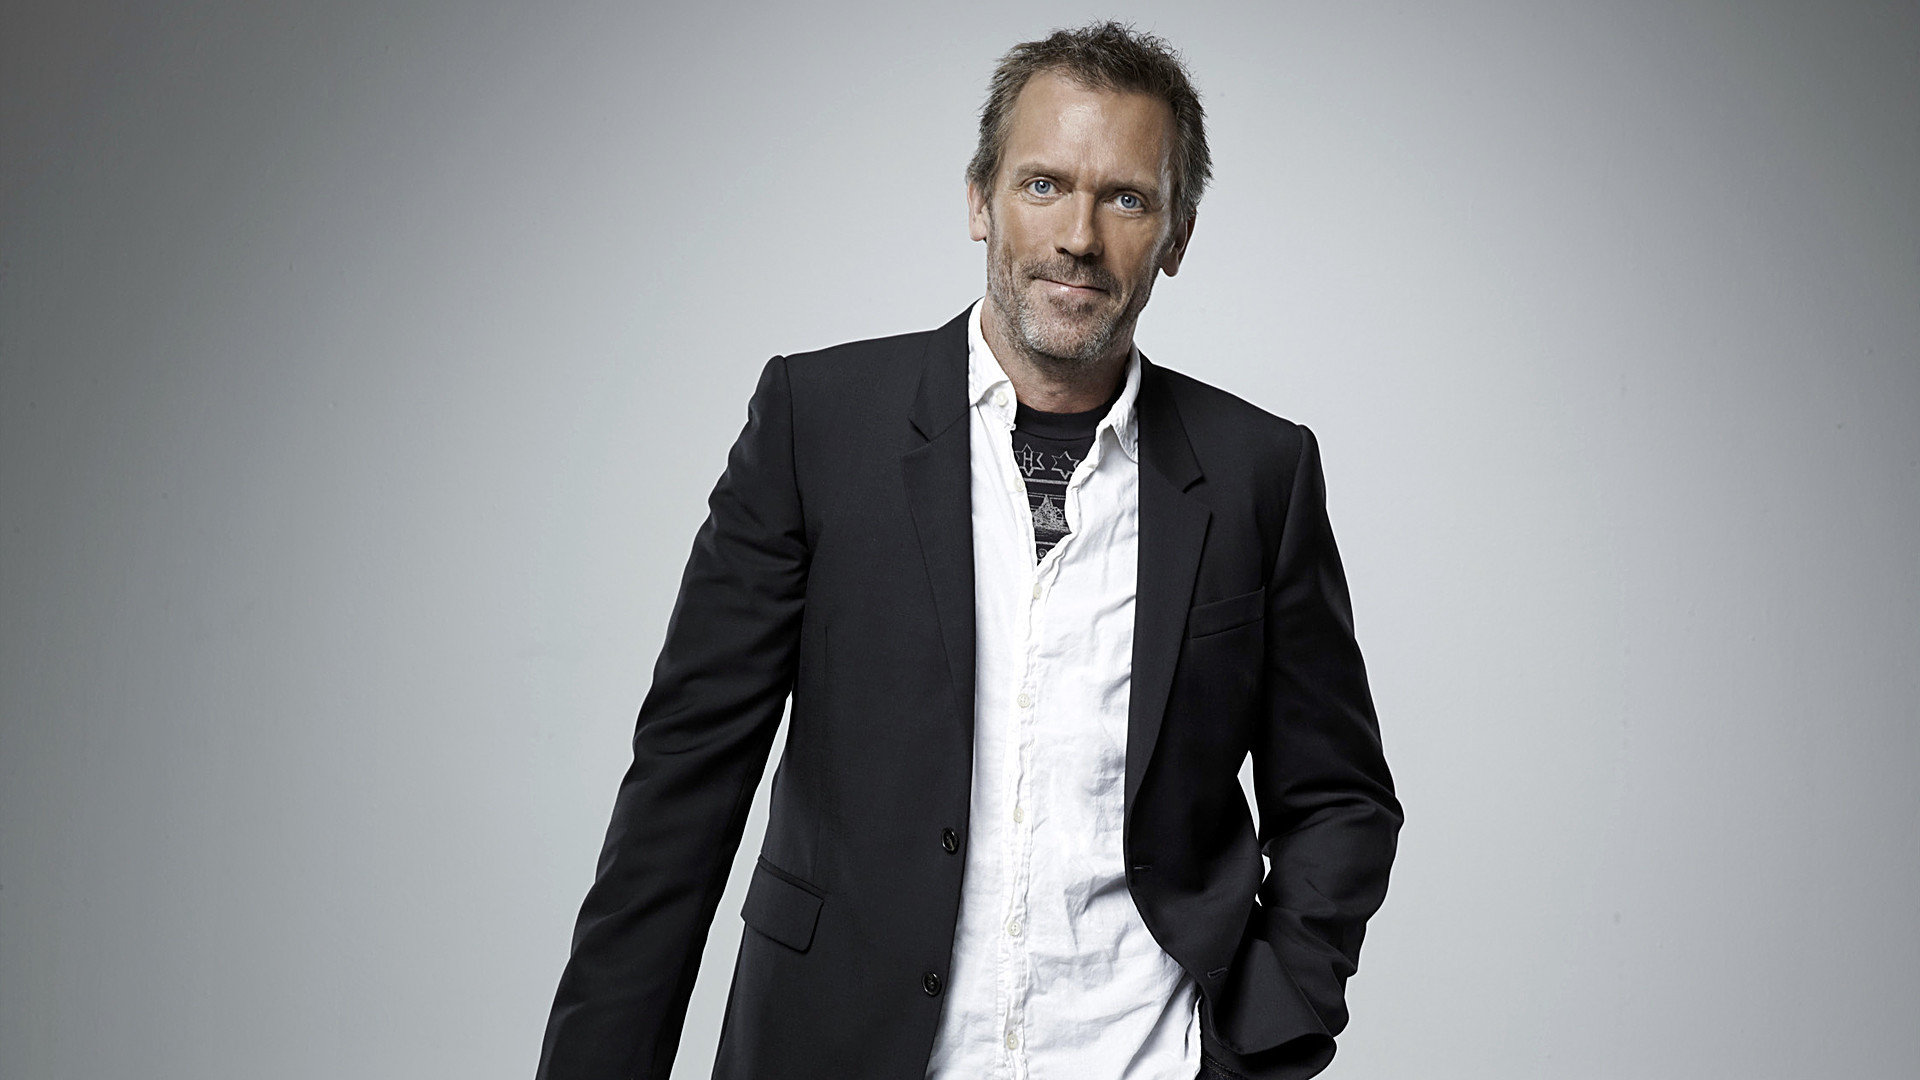 Awesome Dr. House free wallpaper ID:156719 for hd 1920x1080 desktop